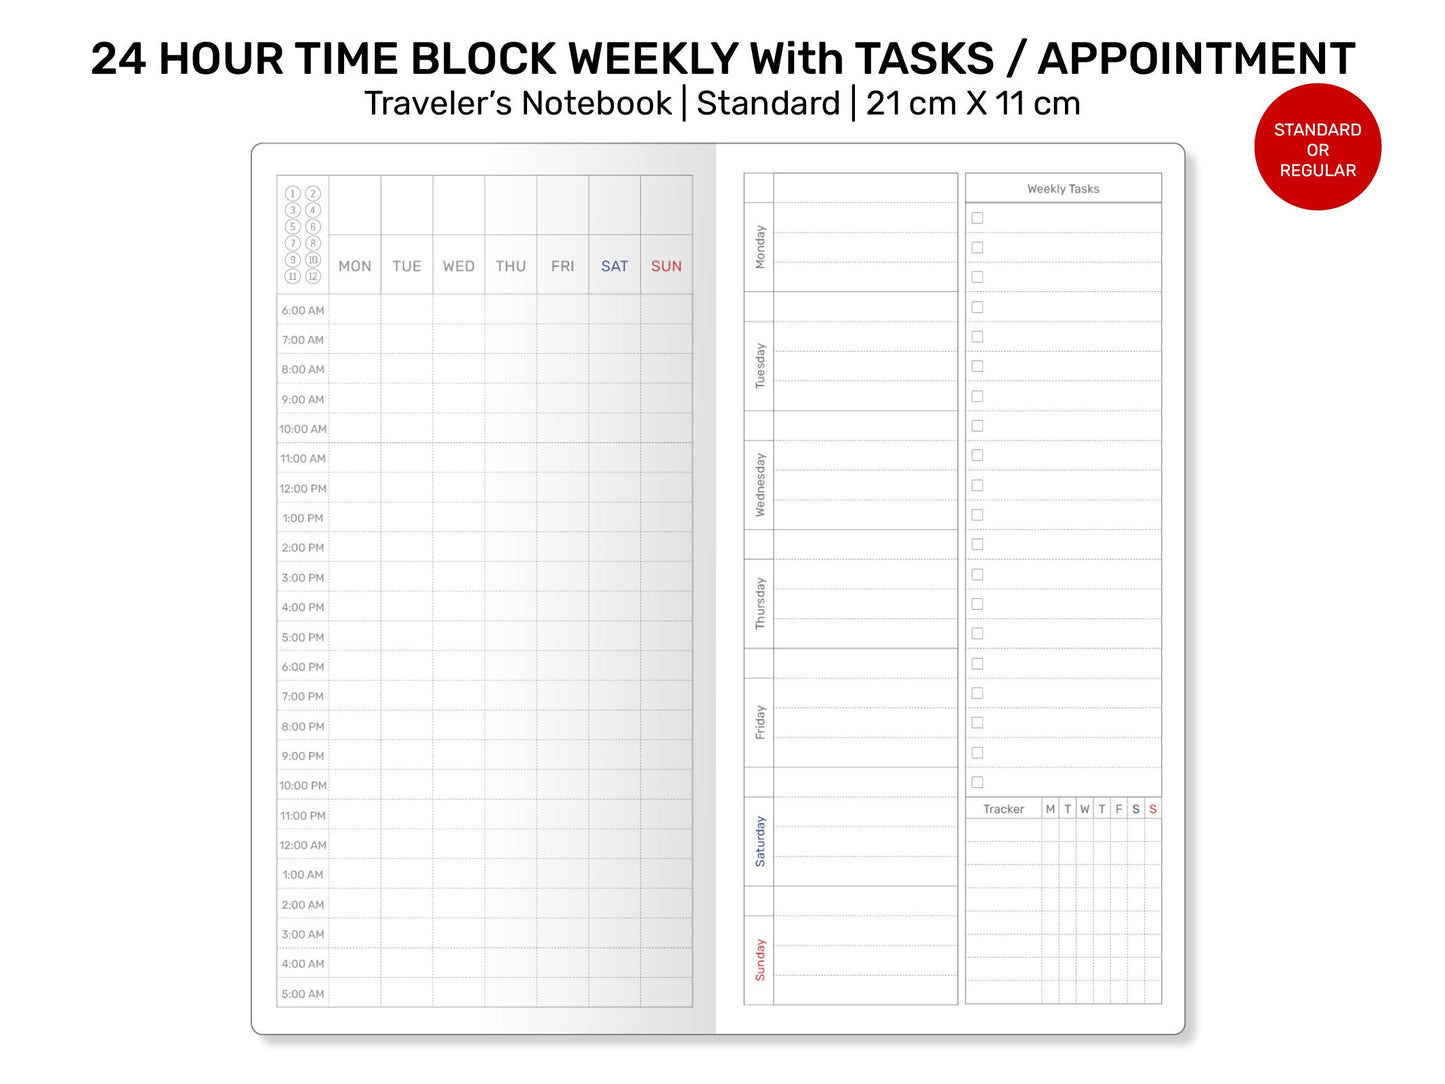 Standard TN WEEKLY 24 Hour Time Block with Appointments, Tasks and Tracker RTN070